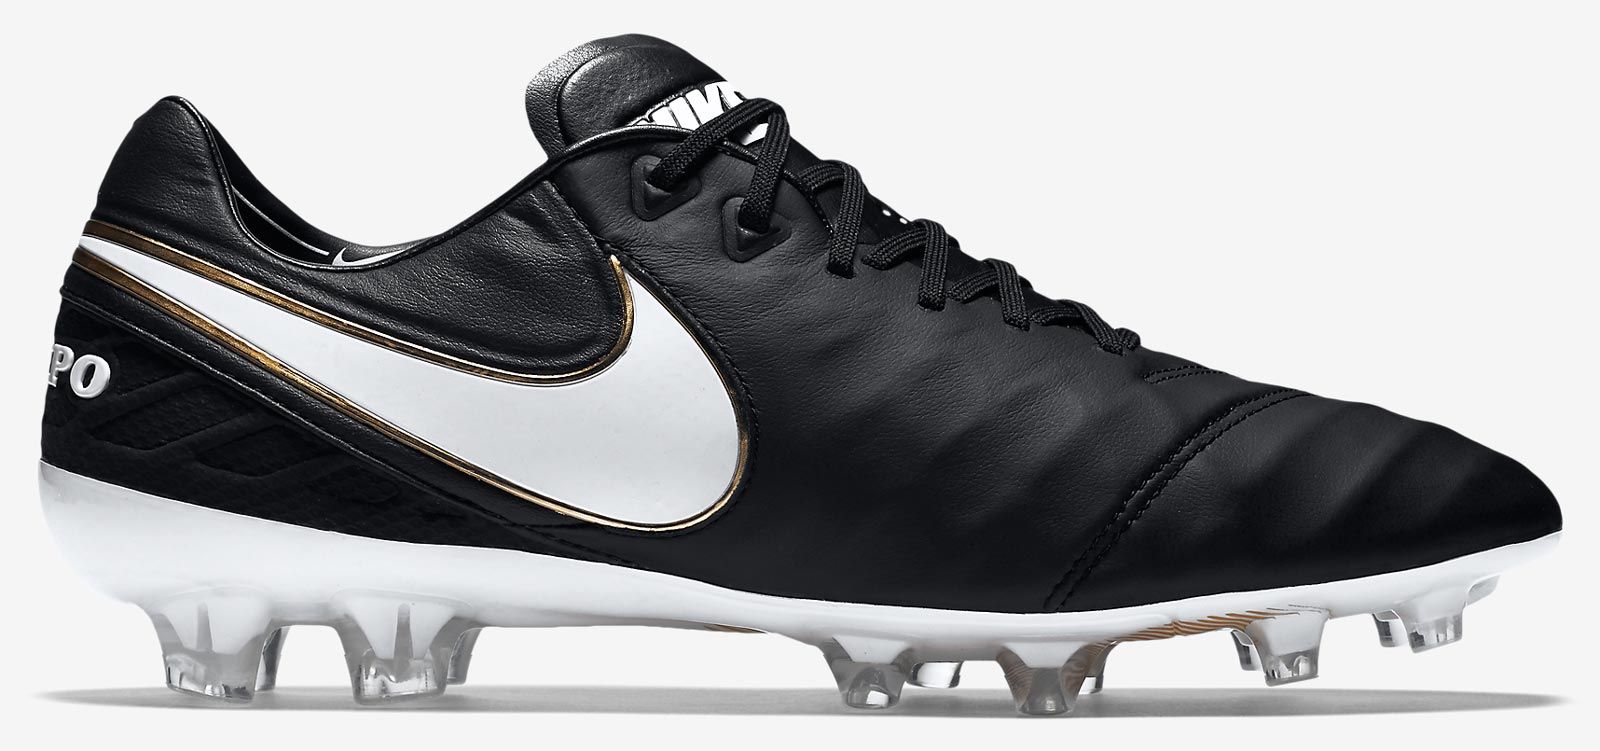 Black Nike Tiempo 6 2016 'Tech Pack' Boots Released - Footy Headlines